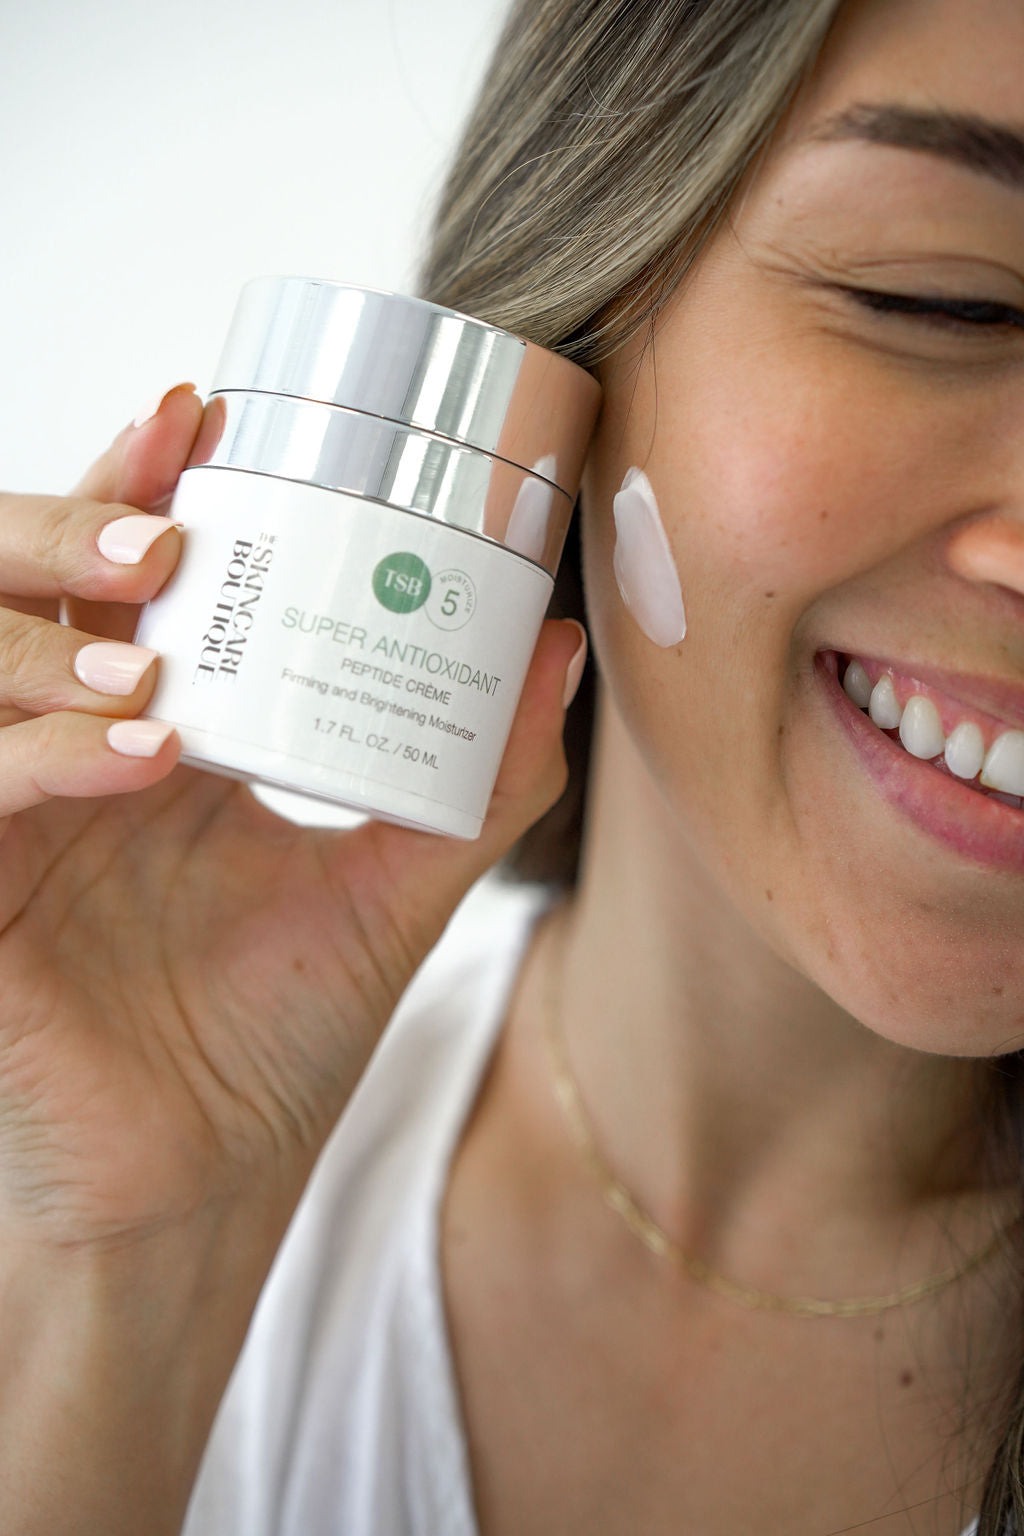 SUPER ANTIOXIDANT PEPTIDE CREME BEING HELD WITH SOMEONE SMILING